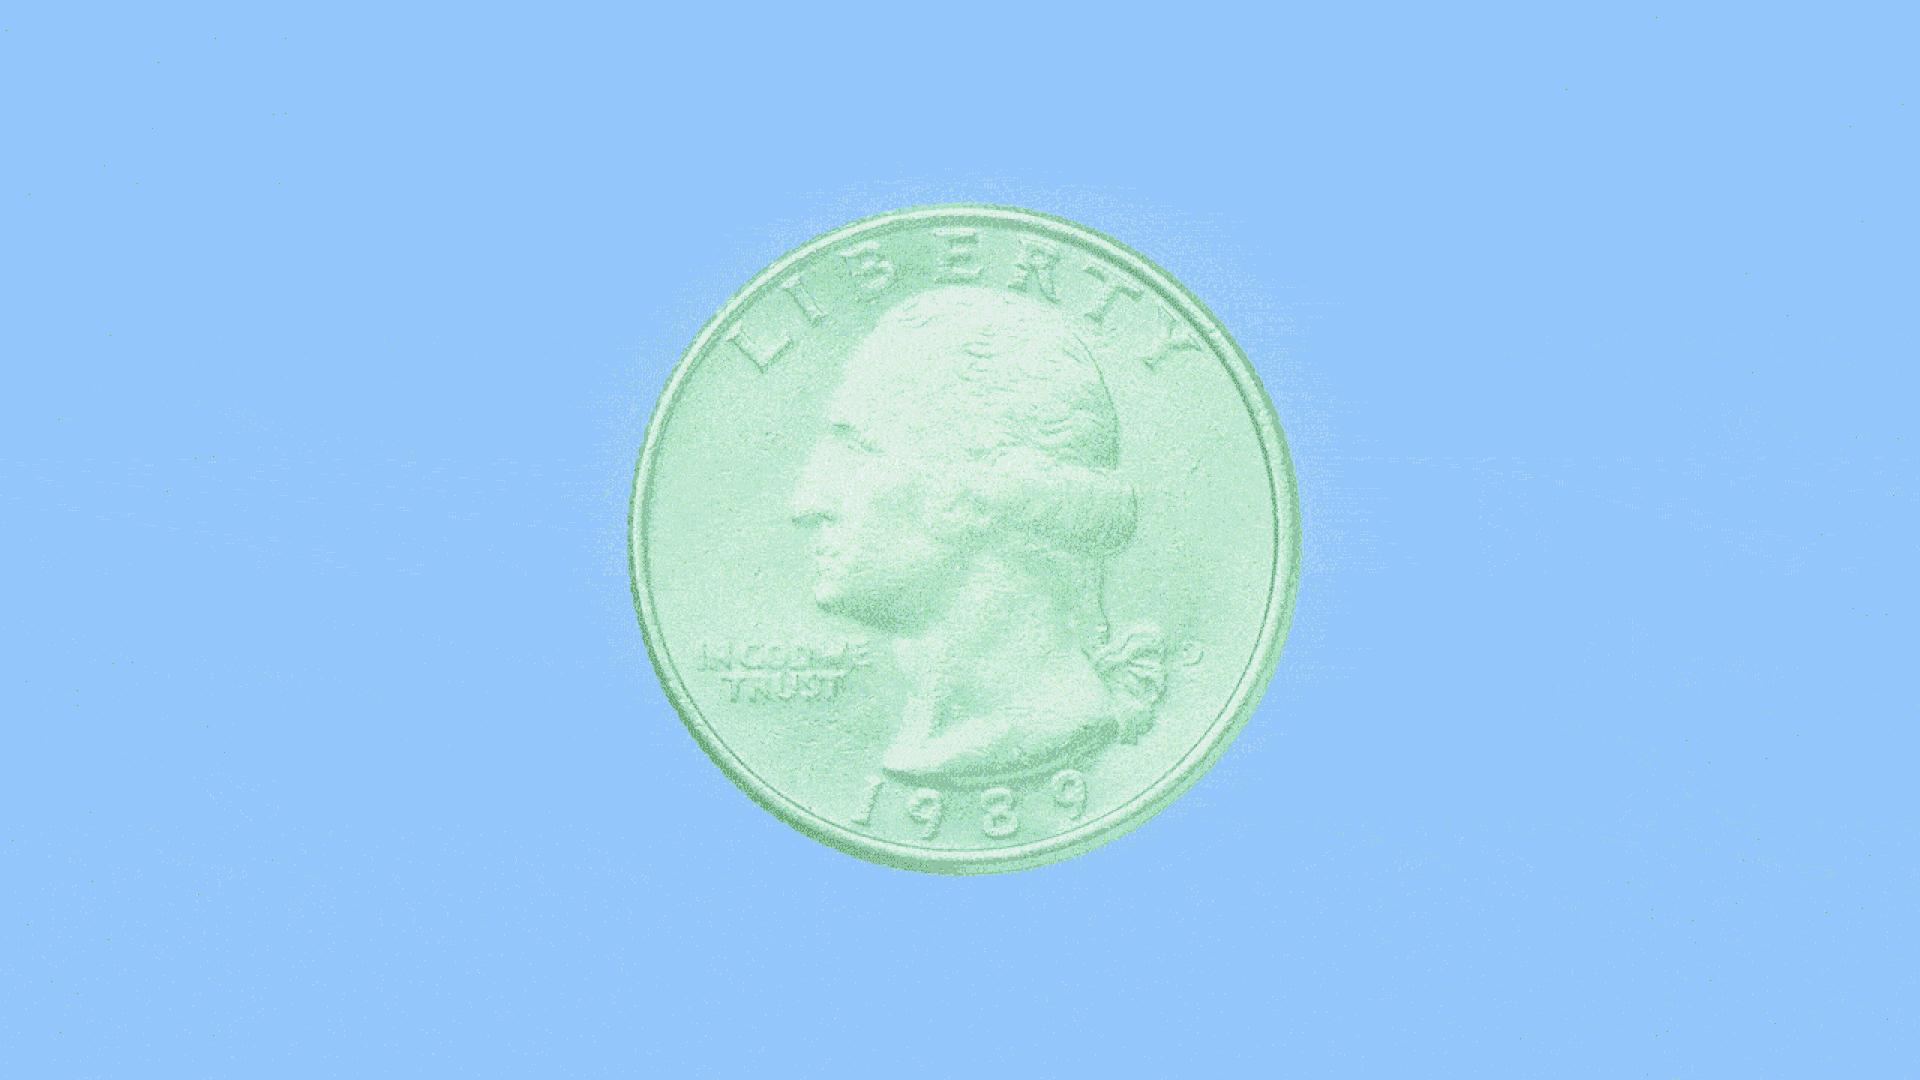 Illustration of a dimly lit coin icon becoming brighter as it loads